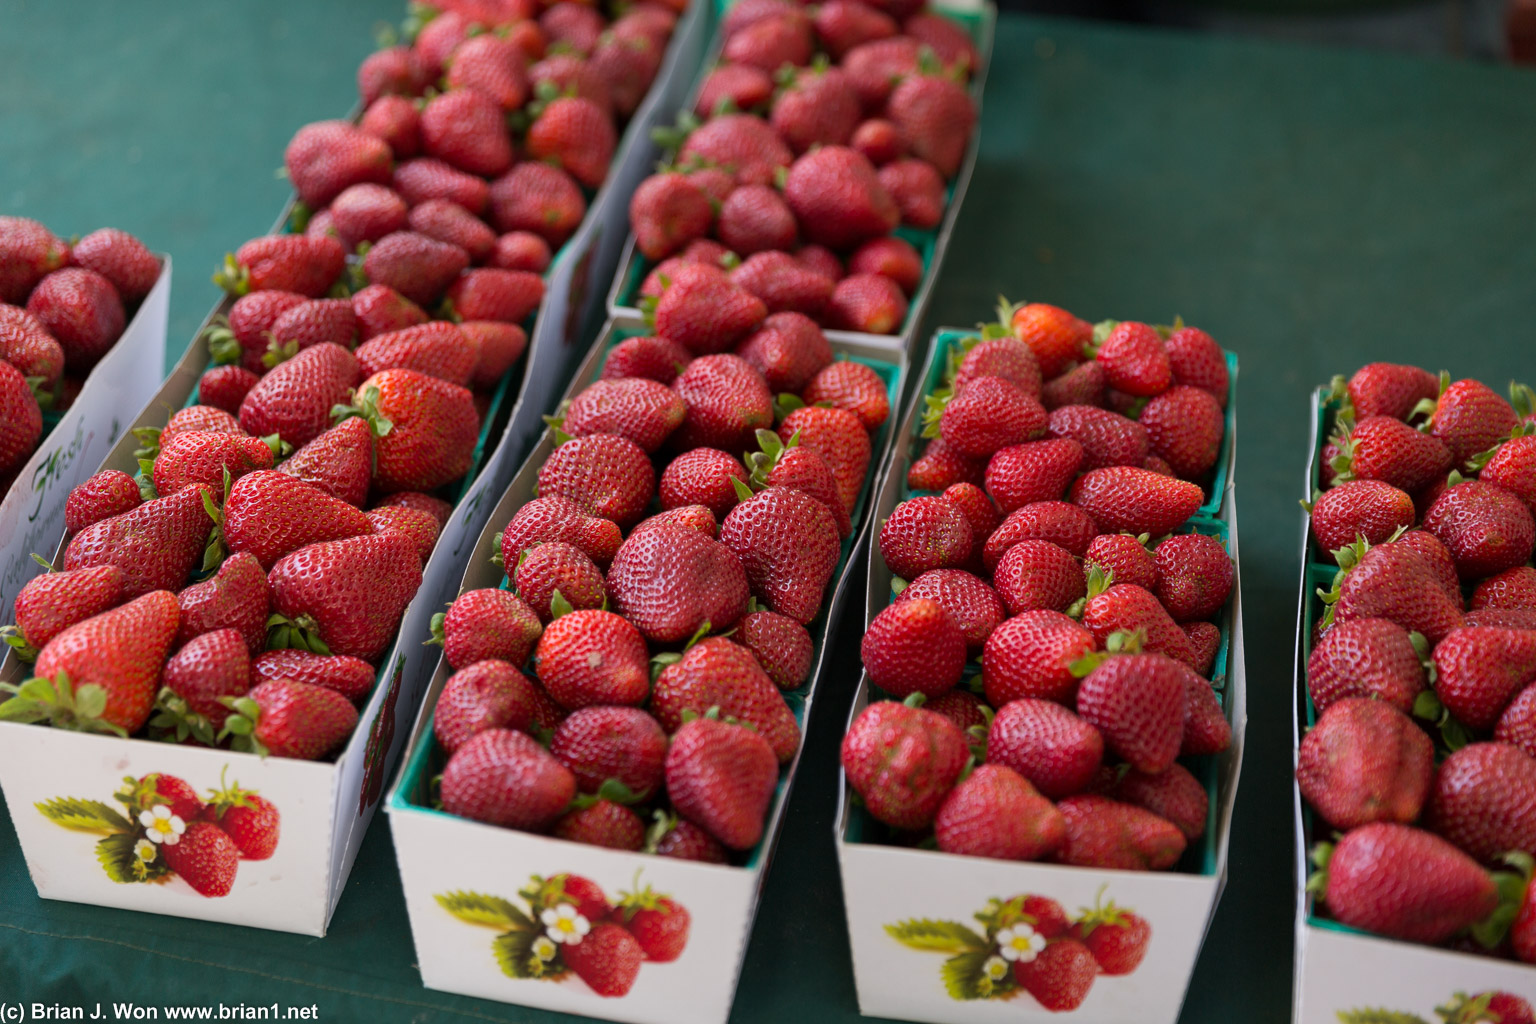 Strawberries at the Mid-Town Farmers Market.